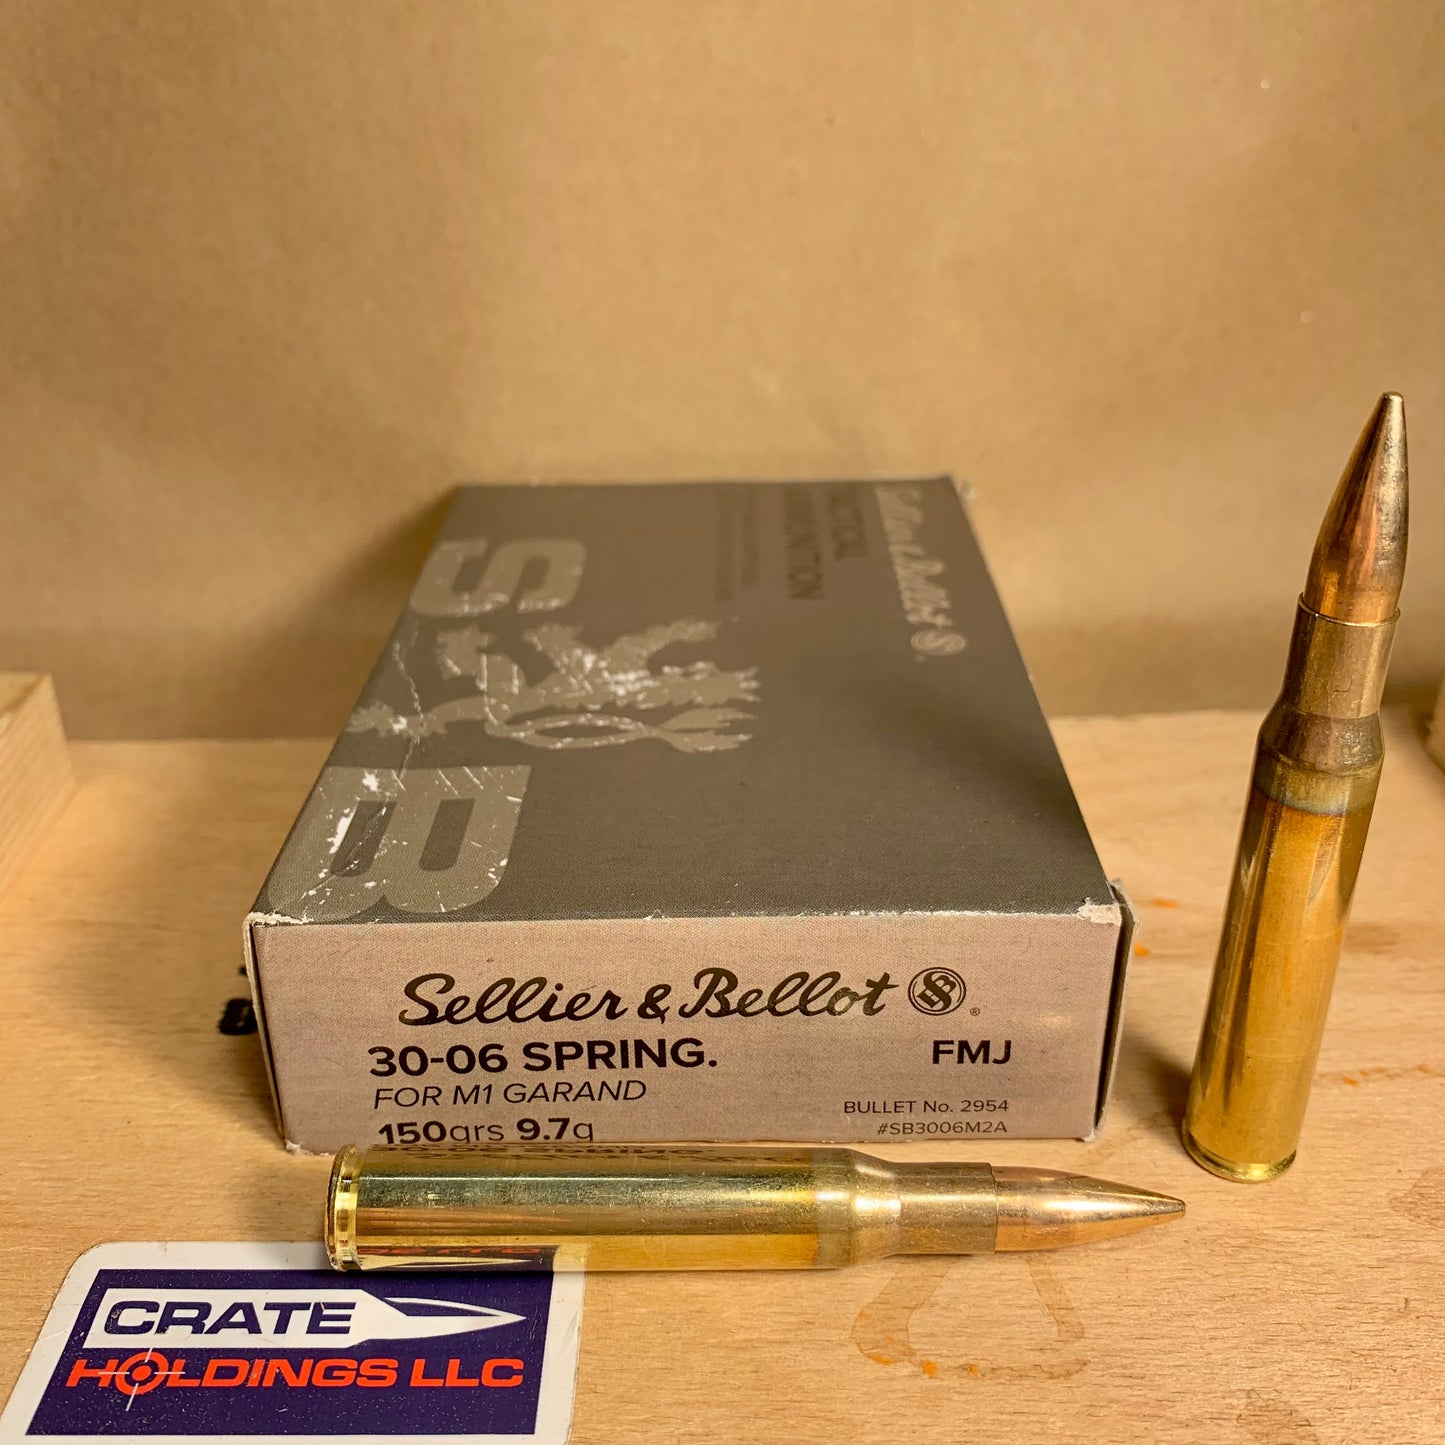 20 Round Box of Sellier & Bellot .30-06 M2 Ball Ammo for M1 Garand 150gr FMJ - SB3006M2A